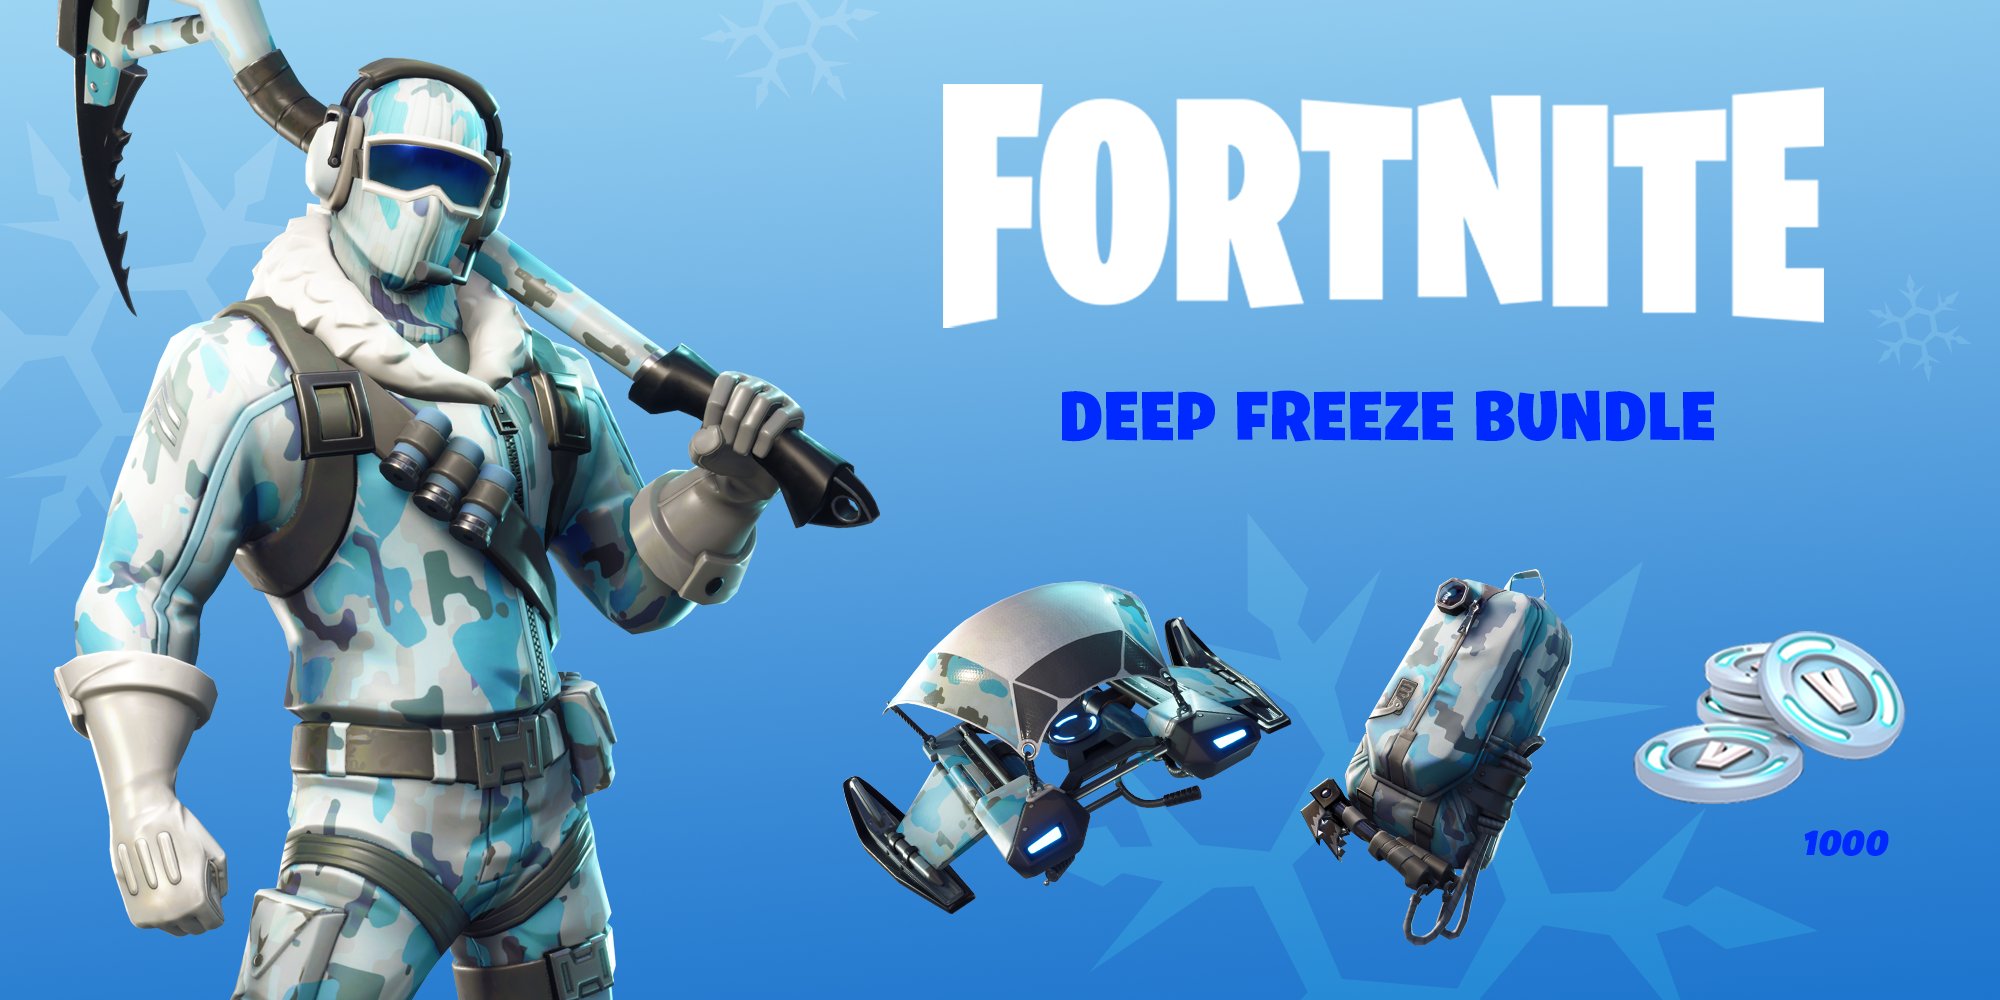 Nintendo UK on Twitter: "Jump into #Fortnite Battle Royale on # NintendoSwitch with the Deep Freeze Bundle, available in stores and on Nintendo #eShop. Includes: - 1000 V-Bucks - Frostbite Outfit -